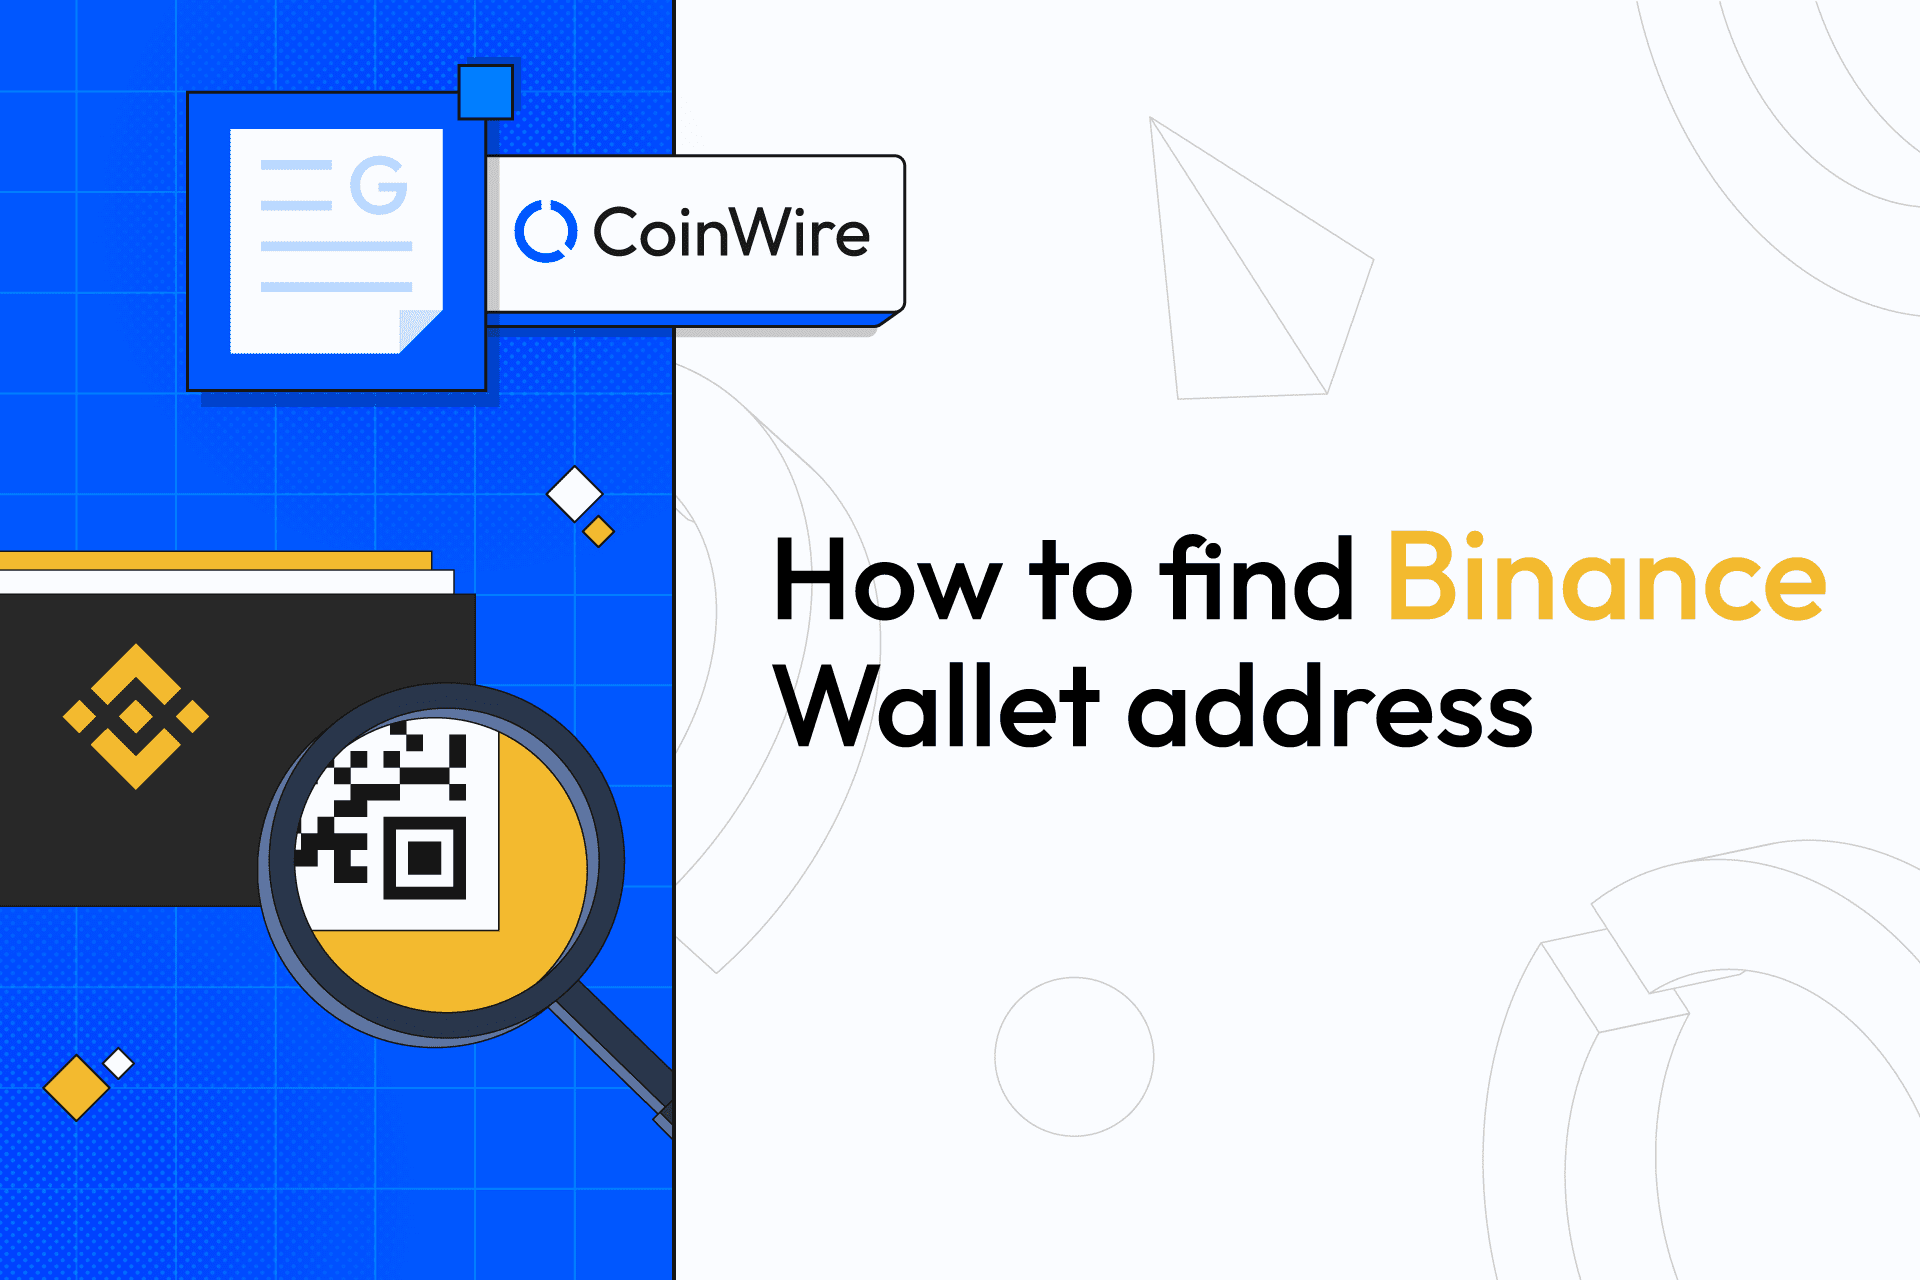 How To Find Binance Wallet Address Featured Image